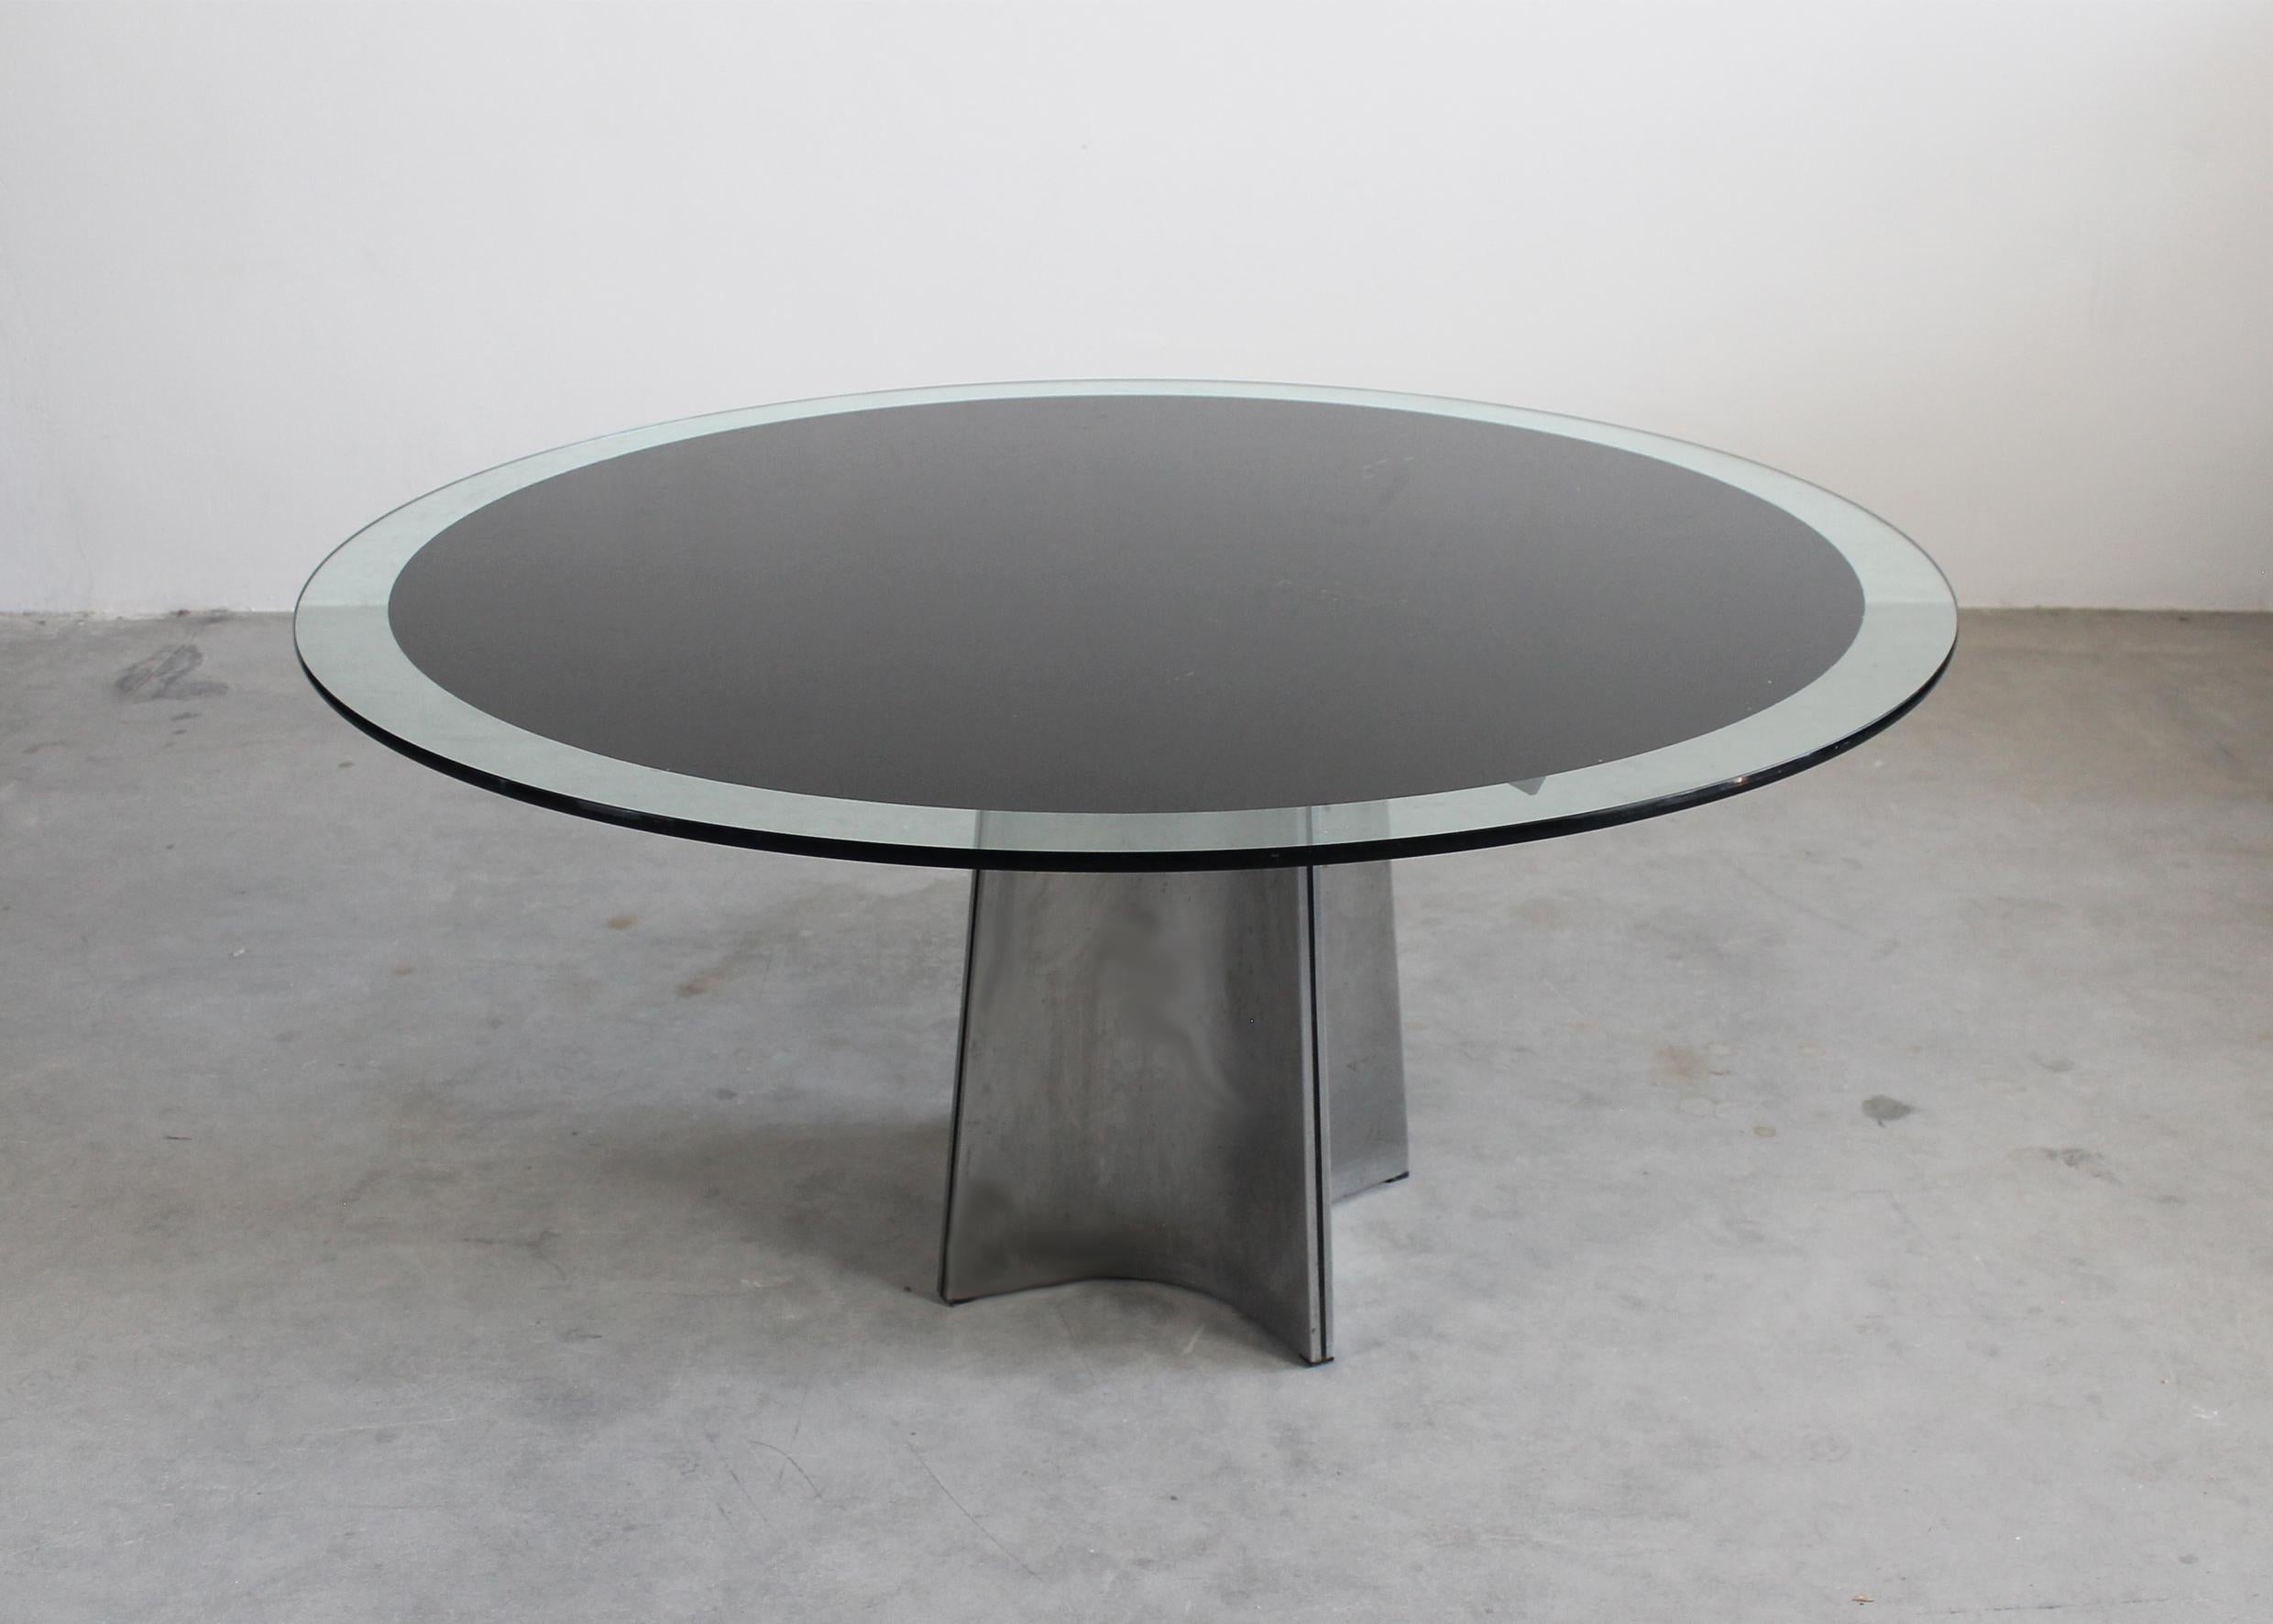 Round pedestal dining table model UFO with a base in brushed steel and tabletop in thick glass with a black enamel decorative circle. 

Designed by Luigi Saccardo and manufactured by Maison Jansen in the 1970s. 

Maison Jansen was a Paris-based